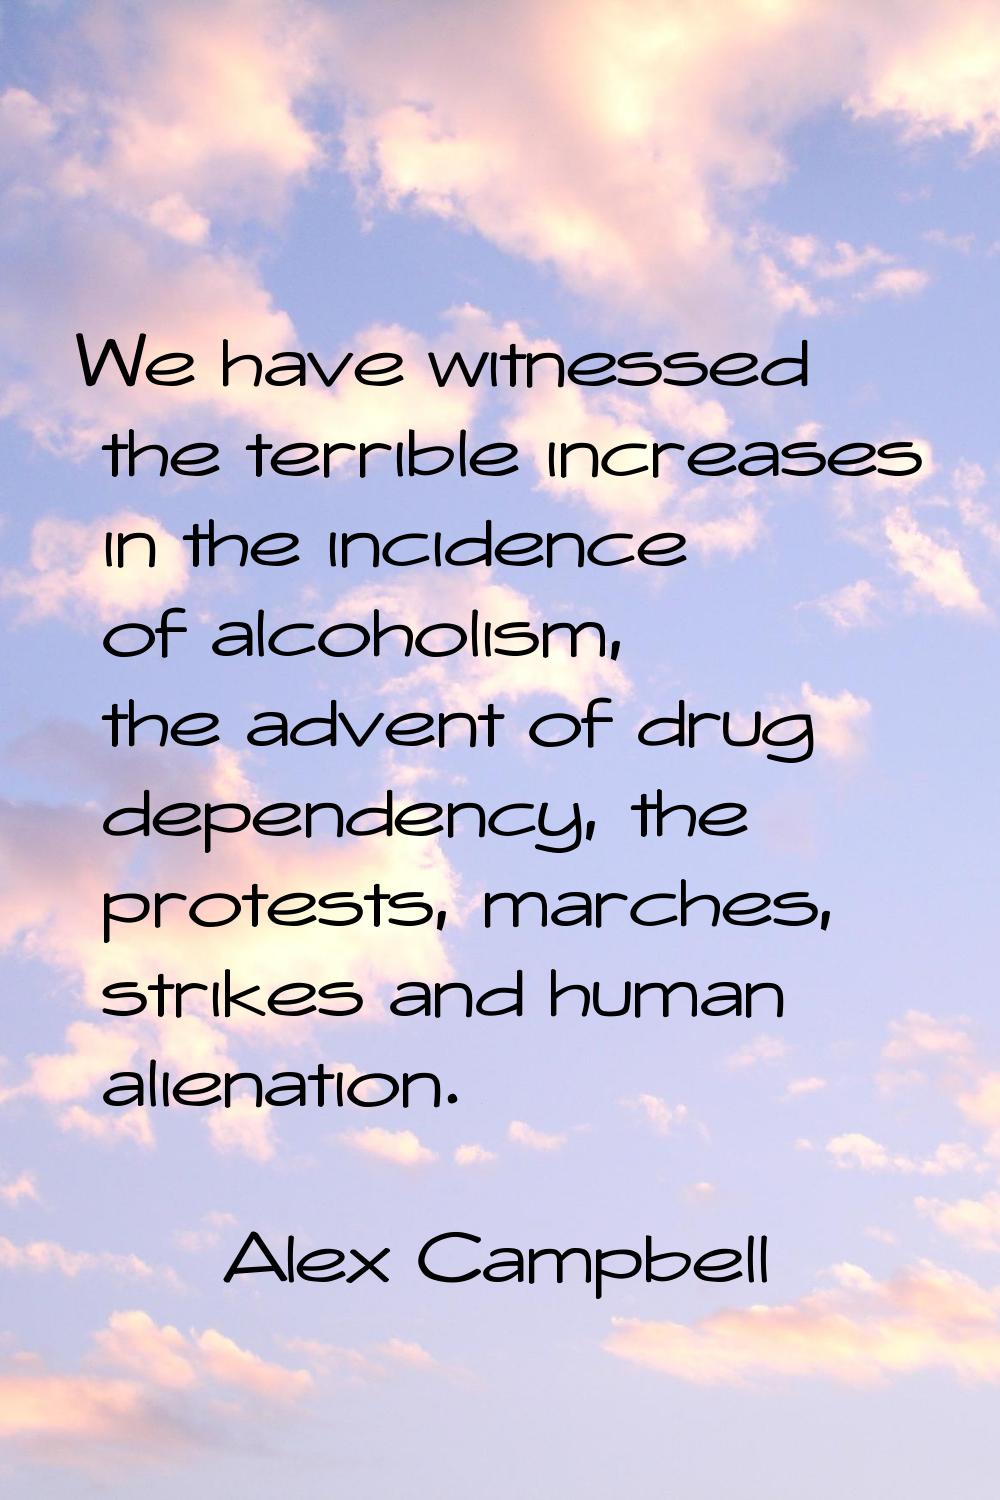 We have witnessed the terrible increases in the incidence of alcoholism, the advent of drug depende